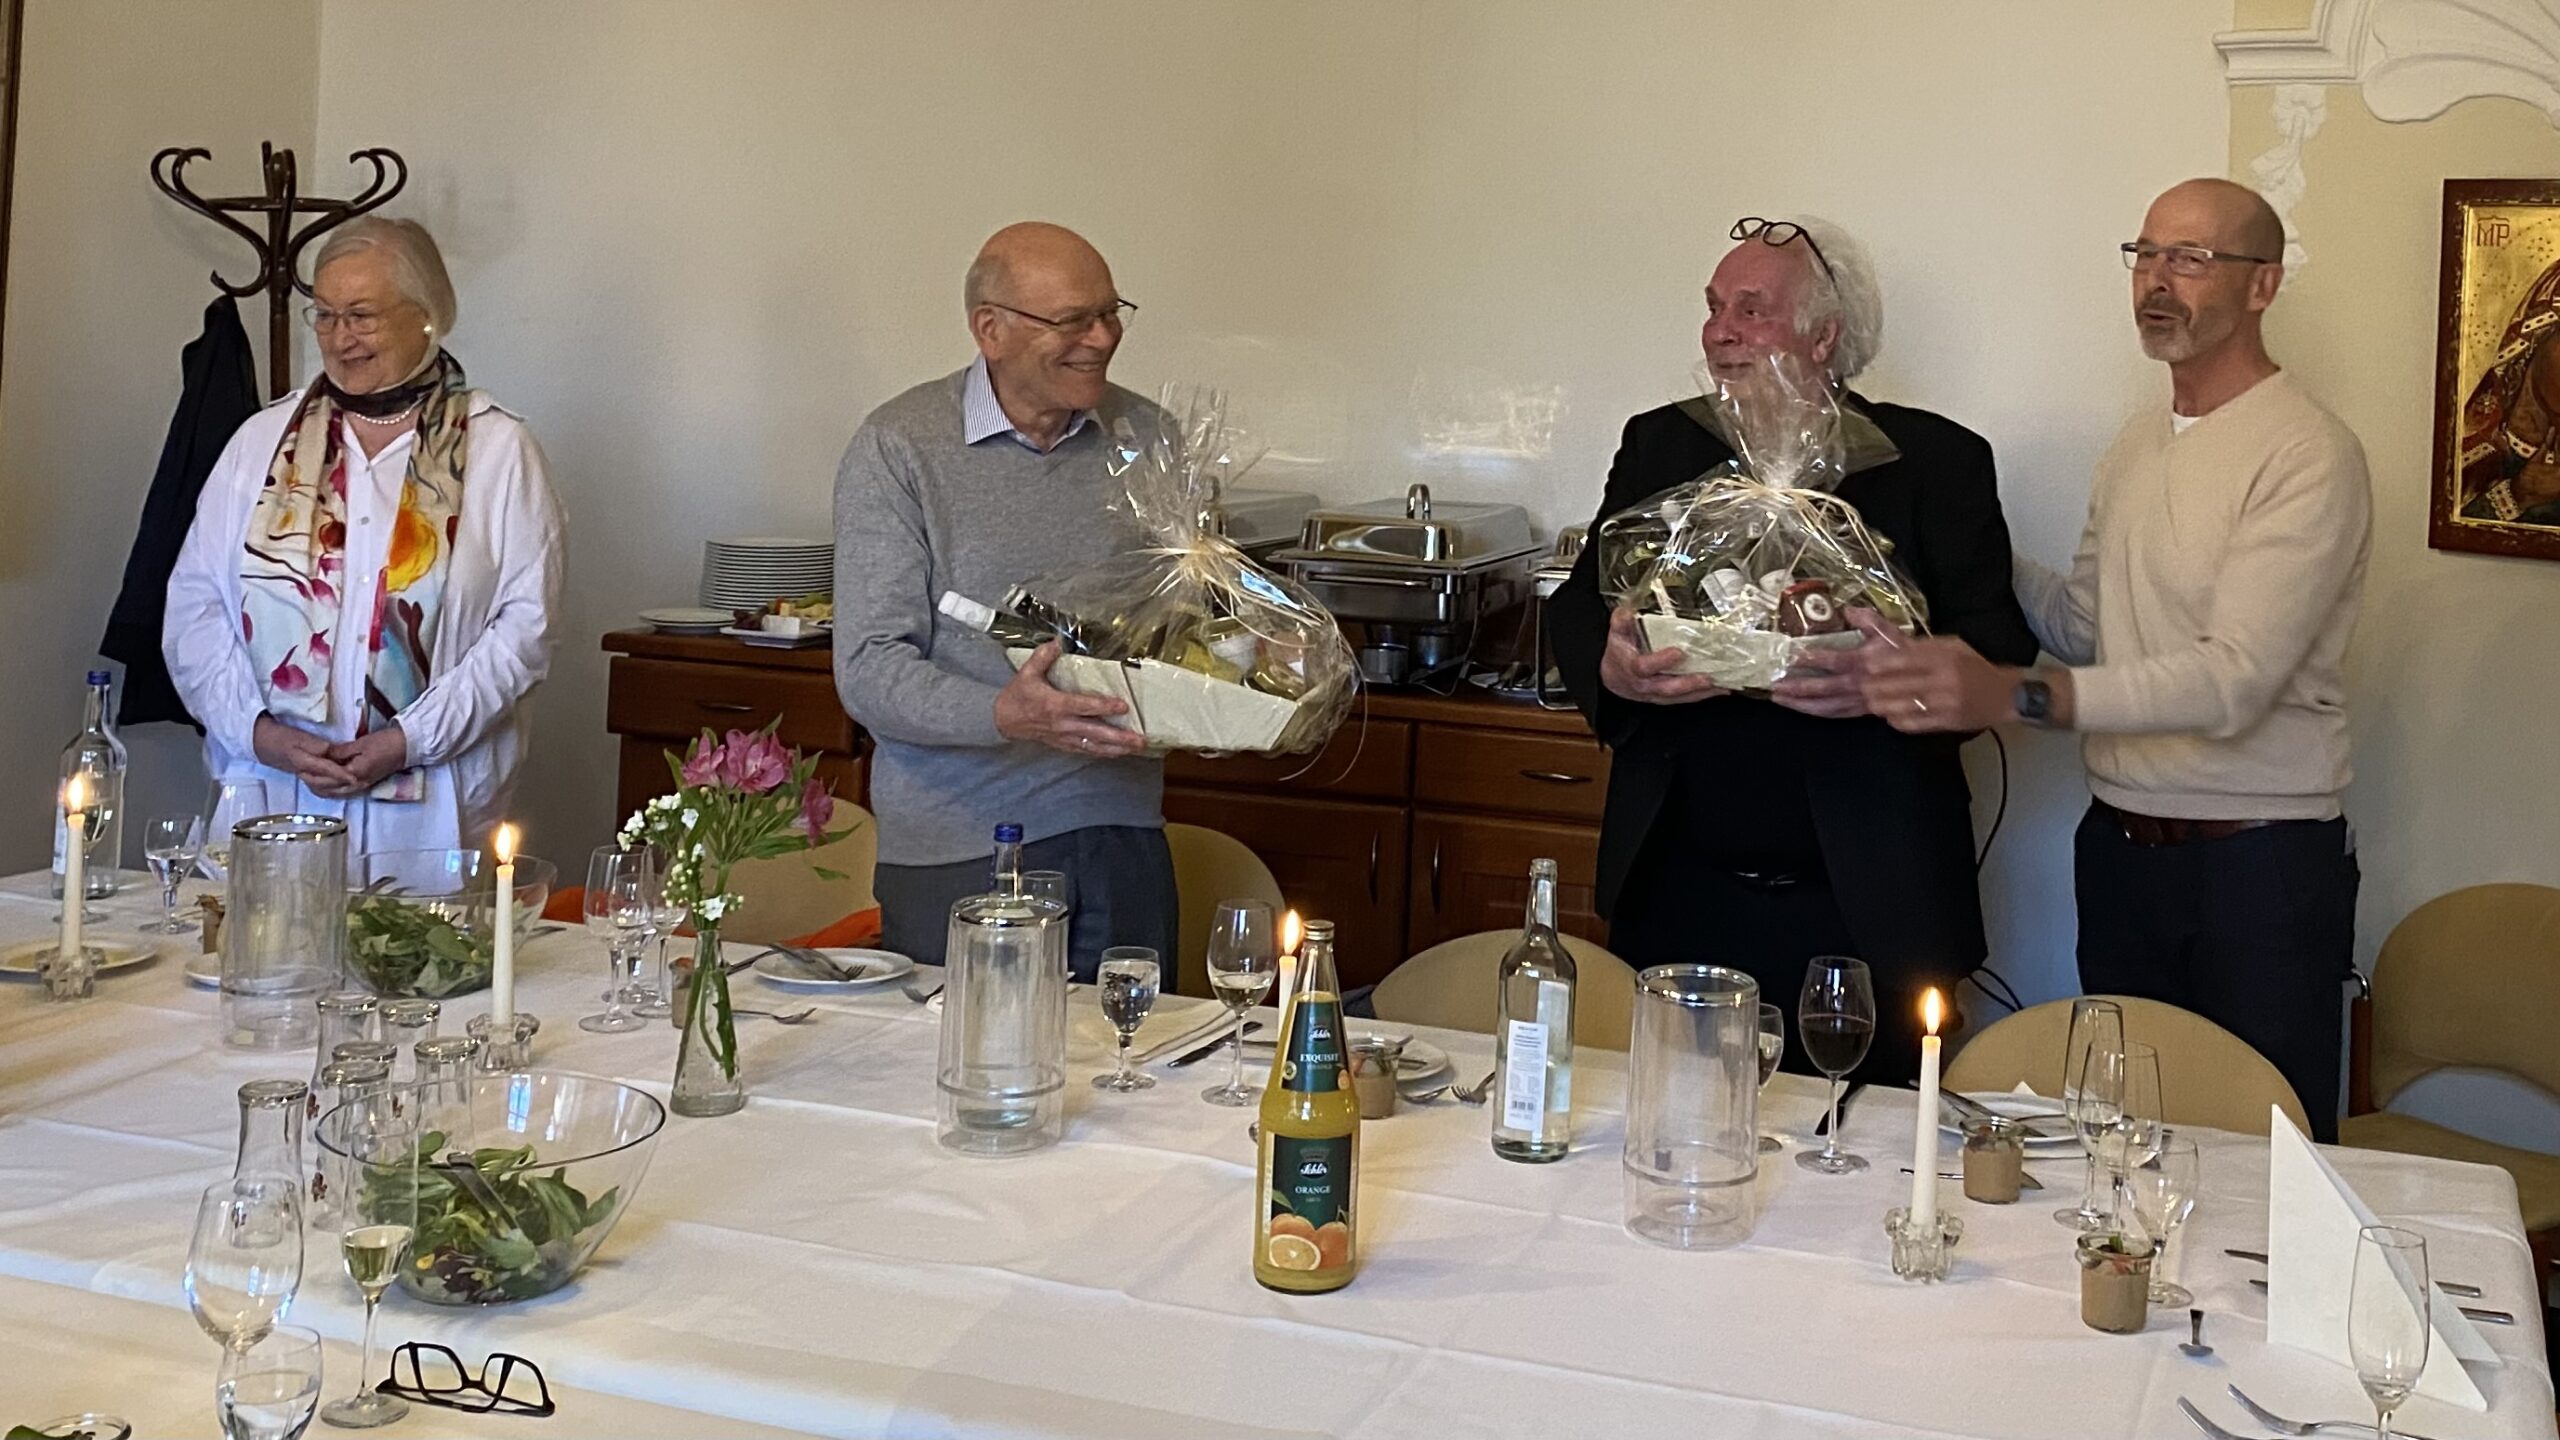 Steinfeld Monastery Foundation bids farewell to former Chairman of the Board Helmut Lanio and Board Member Dr.Alfred Feuerborn